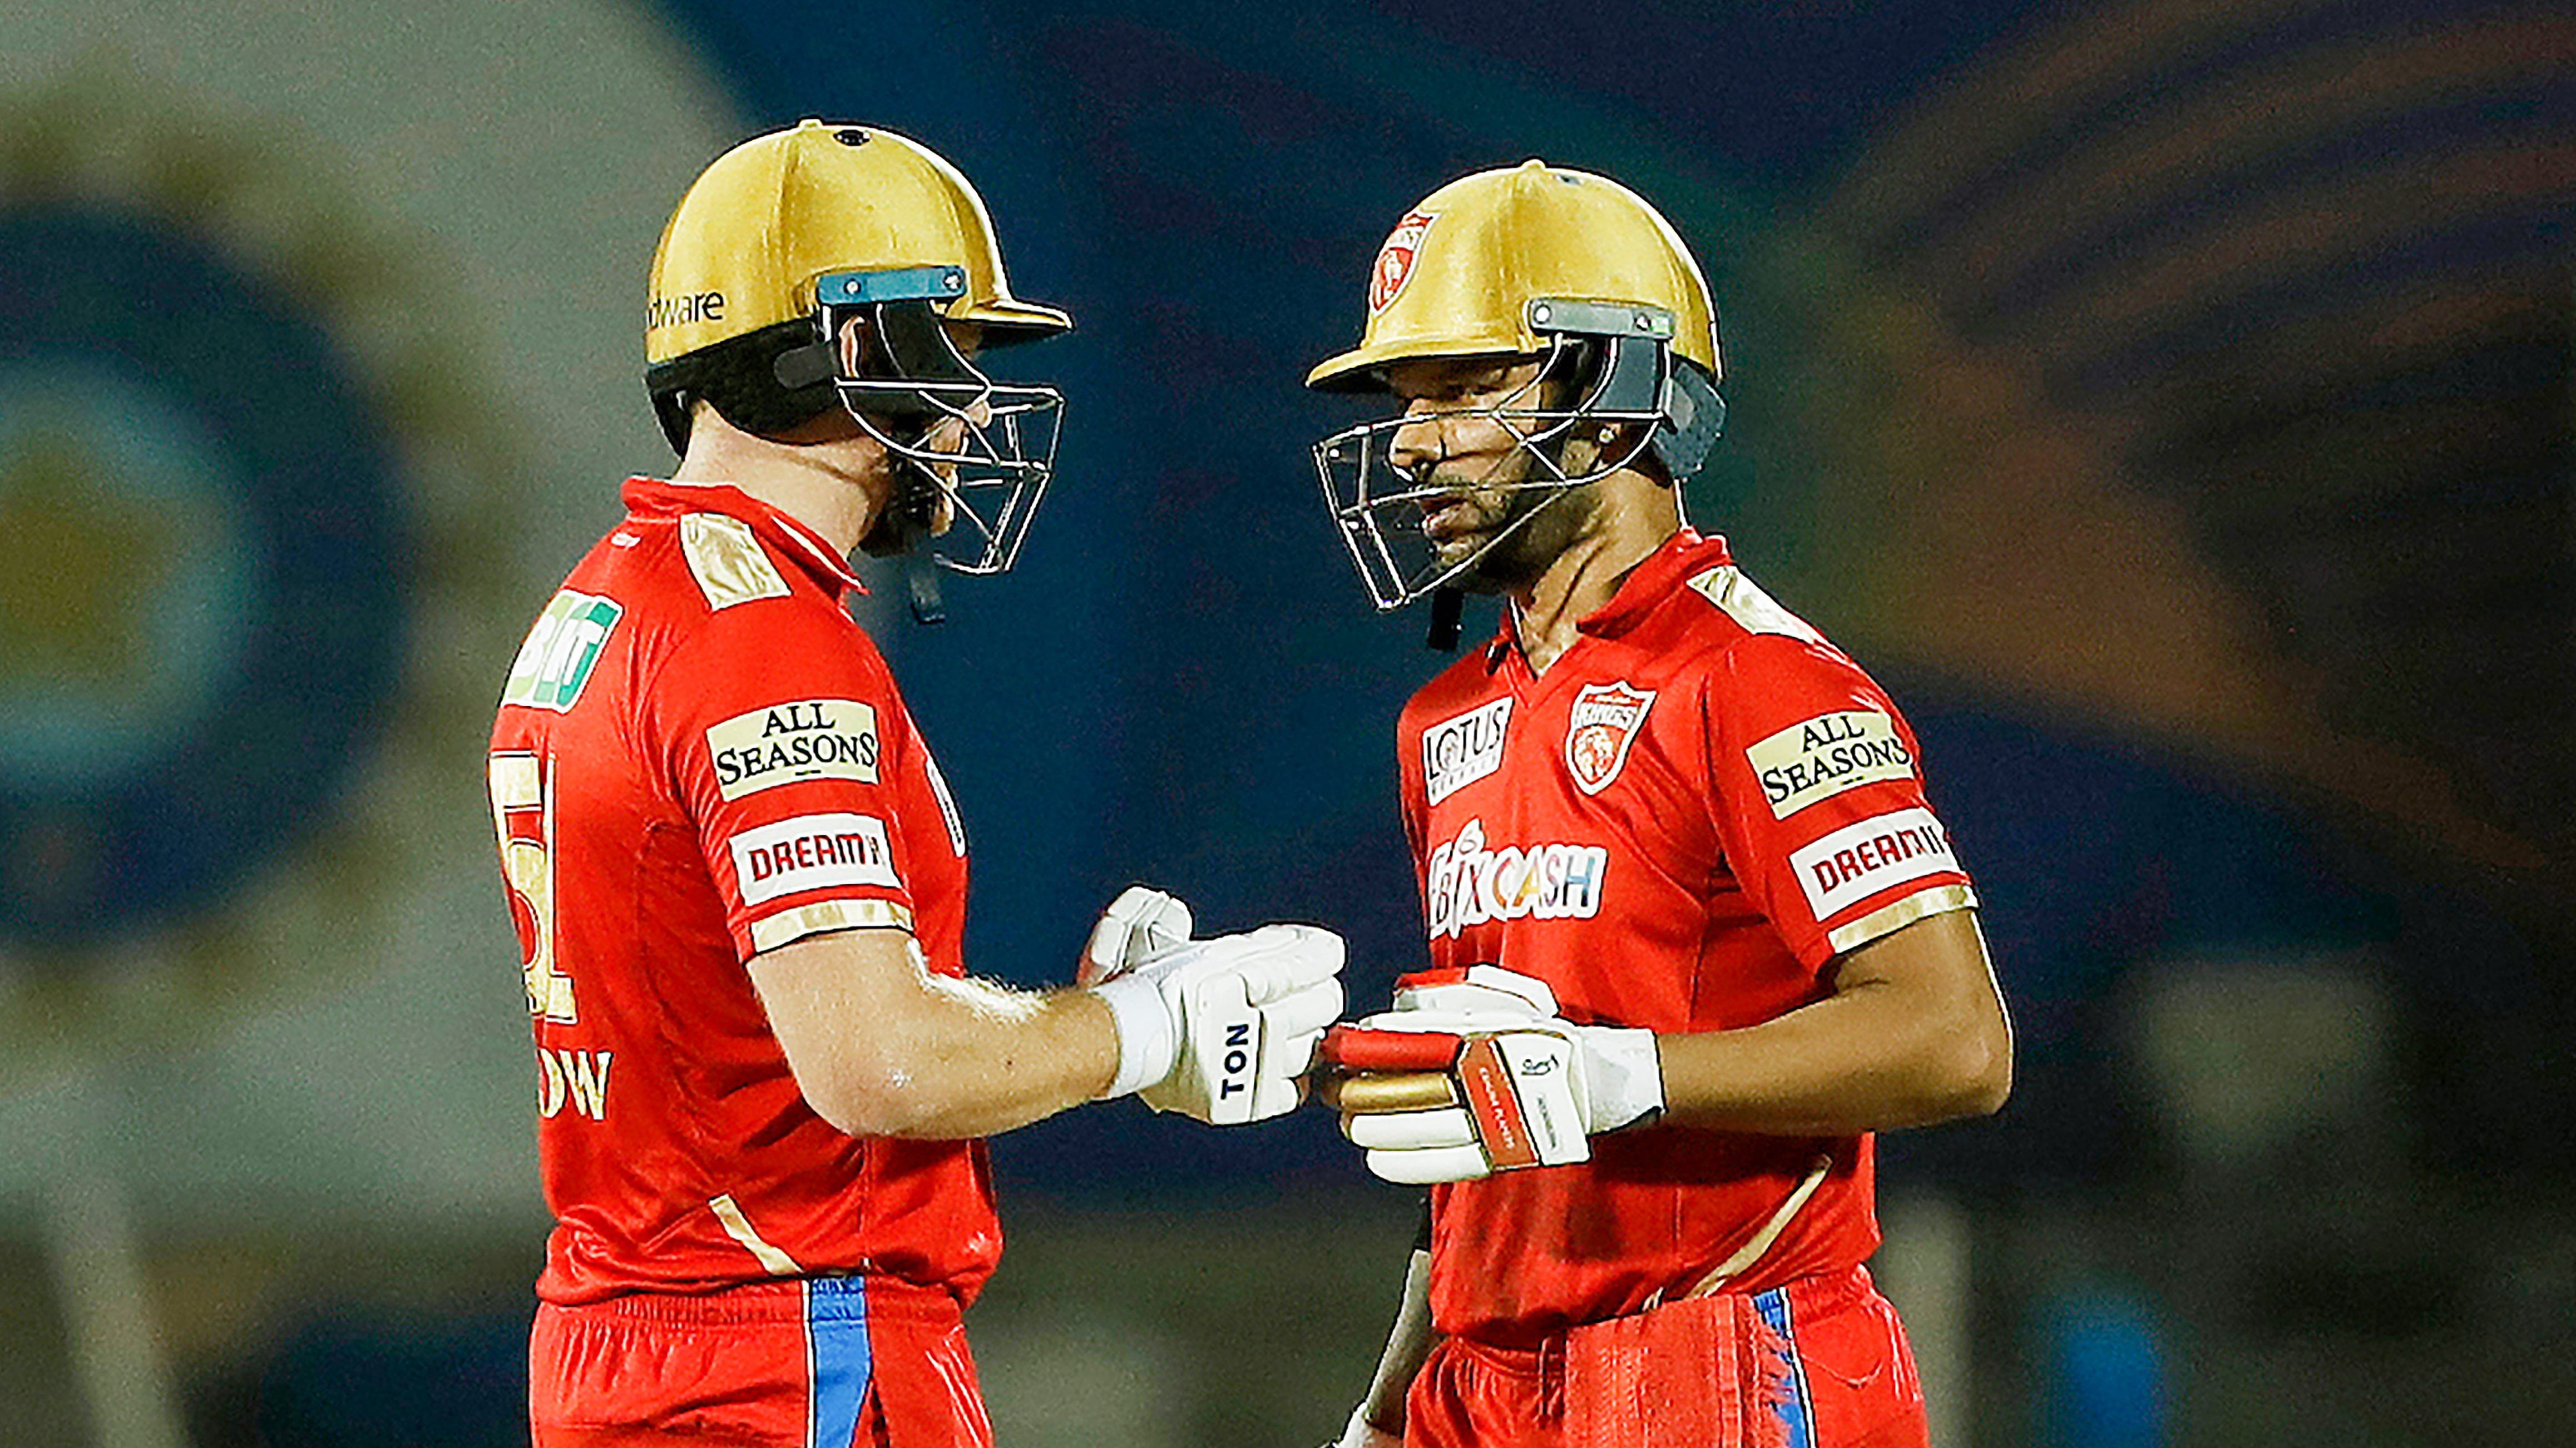 Shikhar Dhawan and Jonny Bairstow of Punjab Kings during the Indian Premier League 2022 cricket match between Royal Challengers Bangalore and Punjab Kings, at the Brabourne Stadium. Credit: PTI Photo